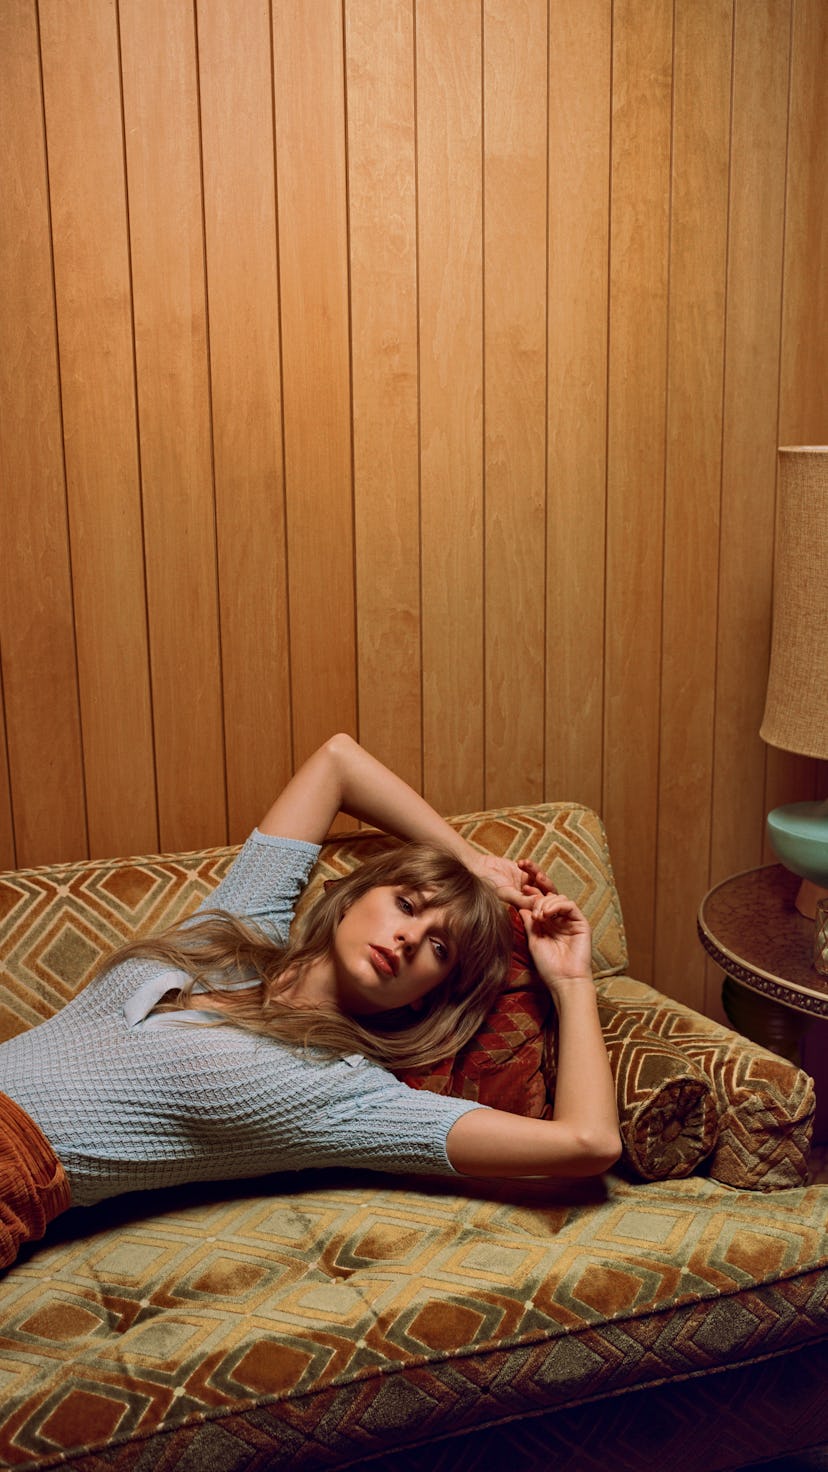 Cover of SOUNDCHECK featuring singer Taylor Swift lying on a retro looking couch